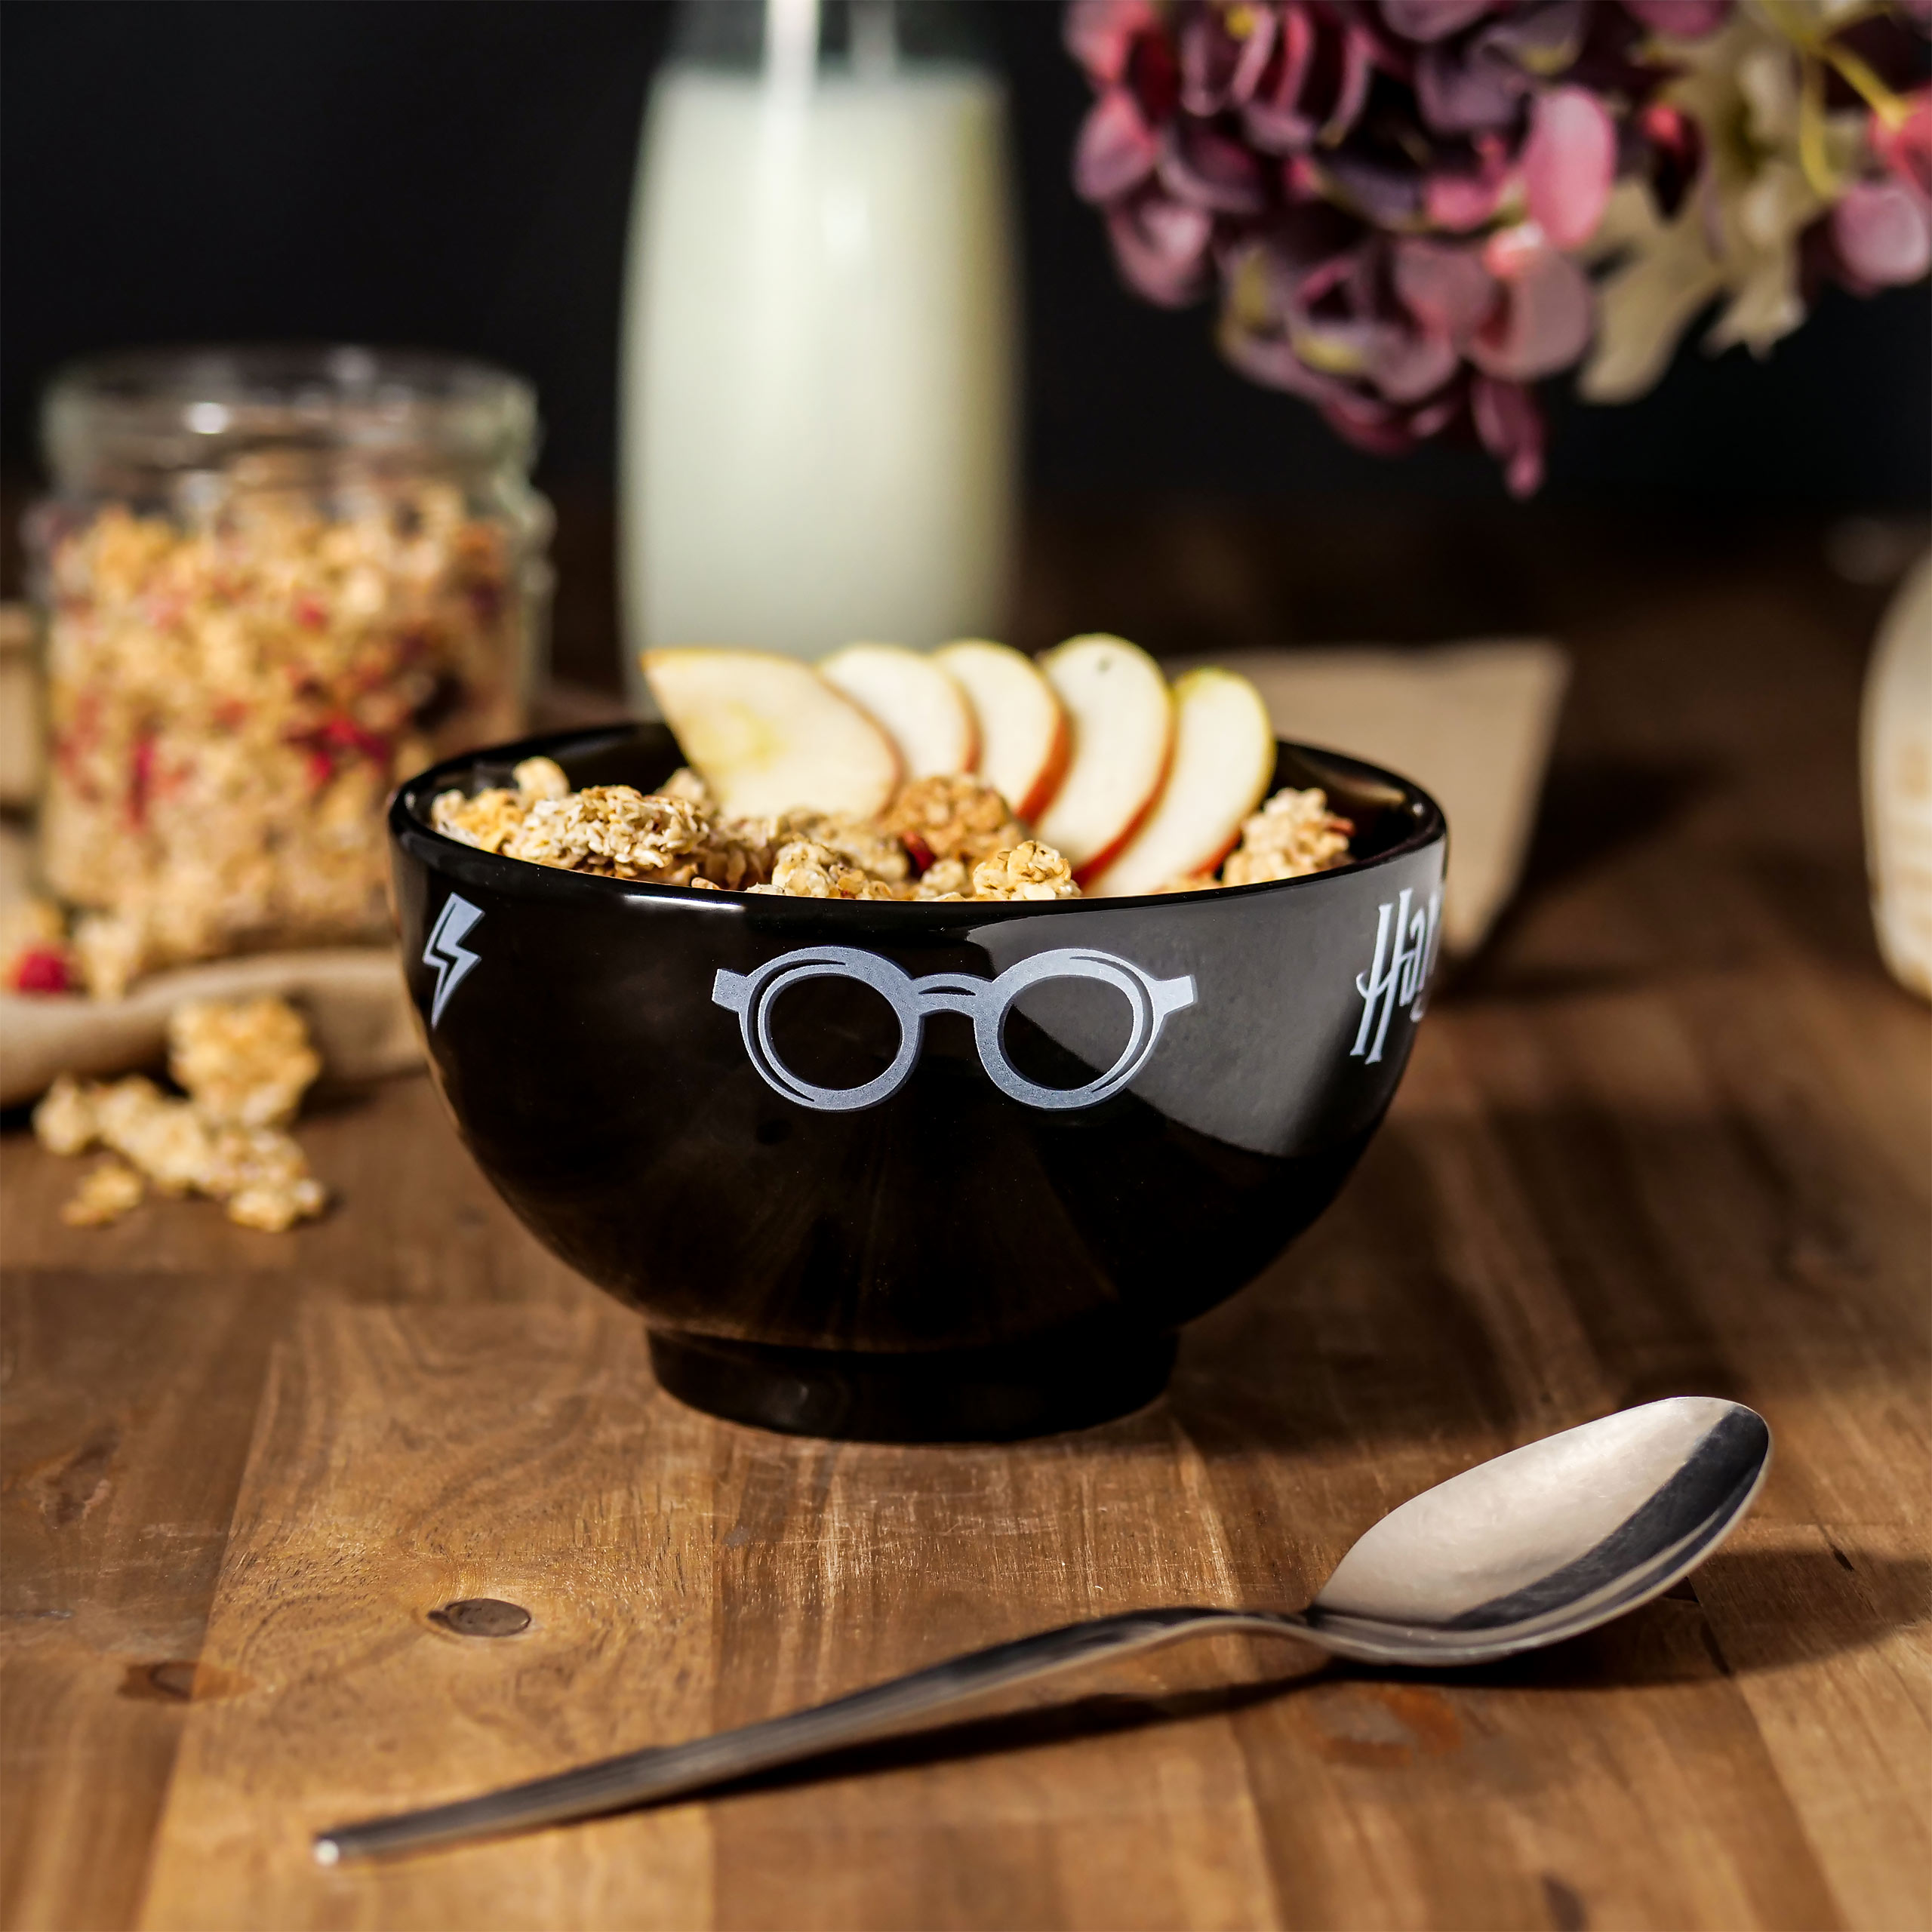 Harry Potter - Icons Cereal Bowl